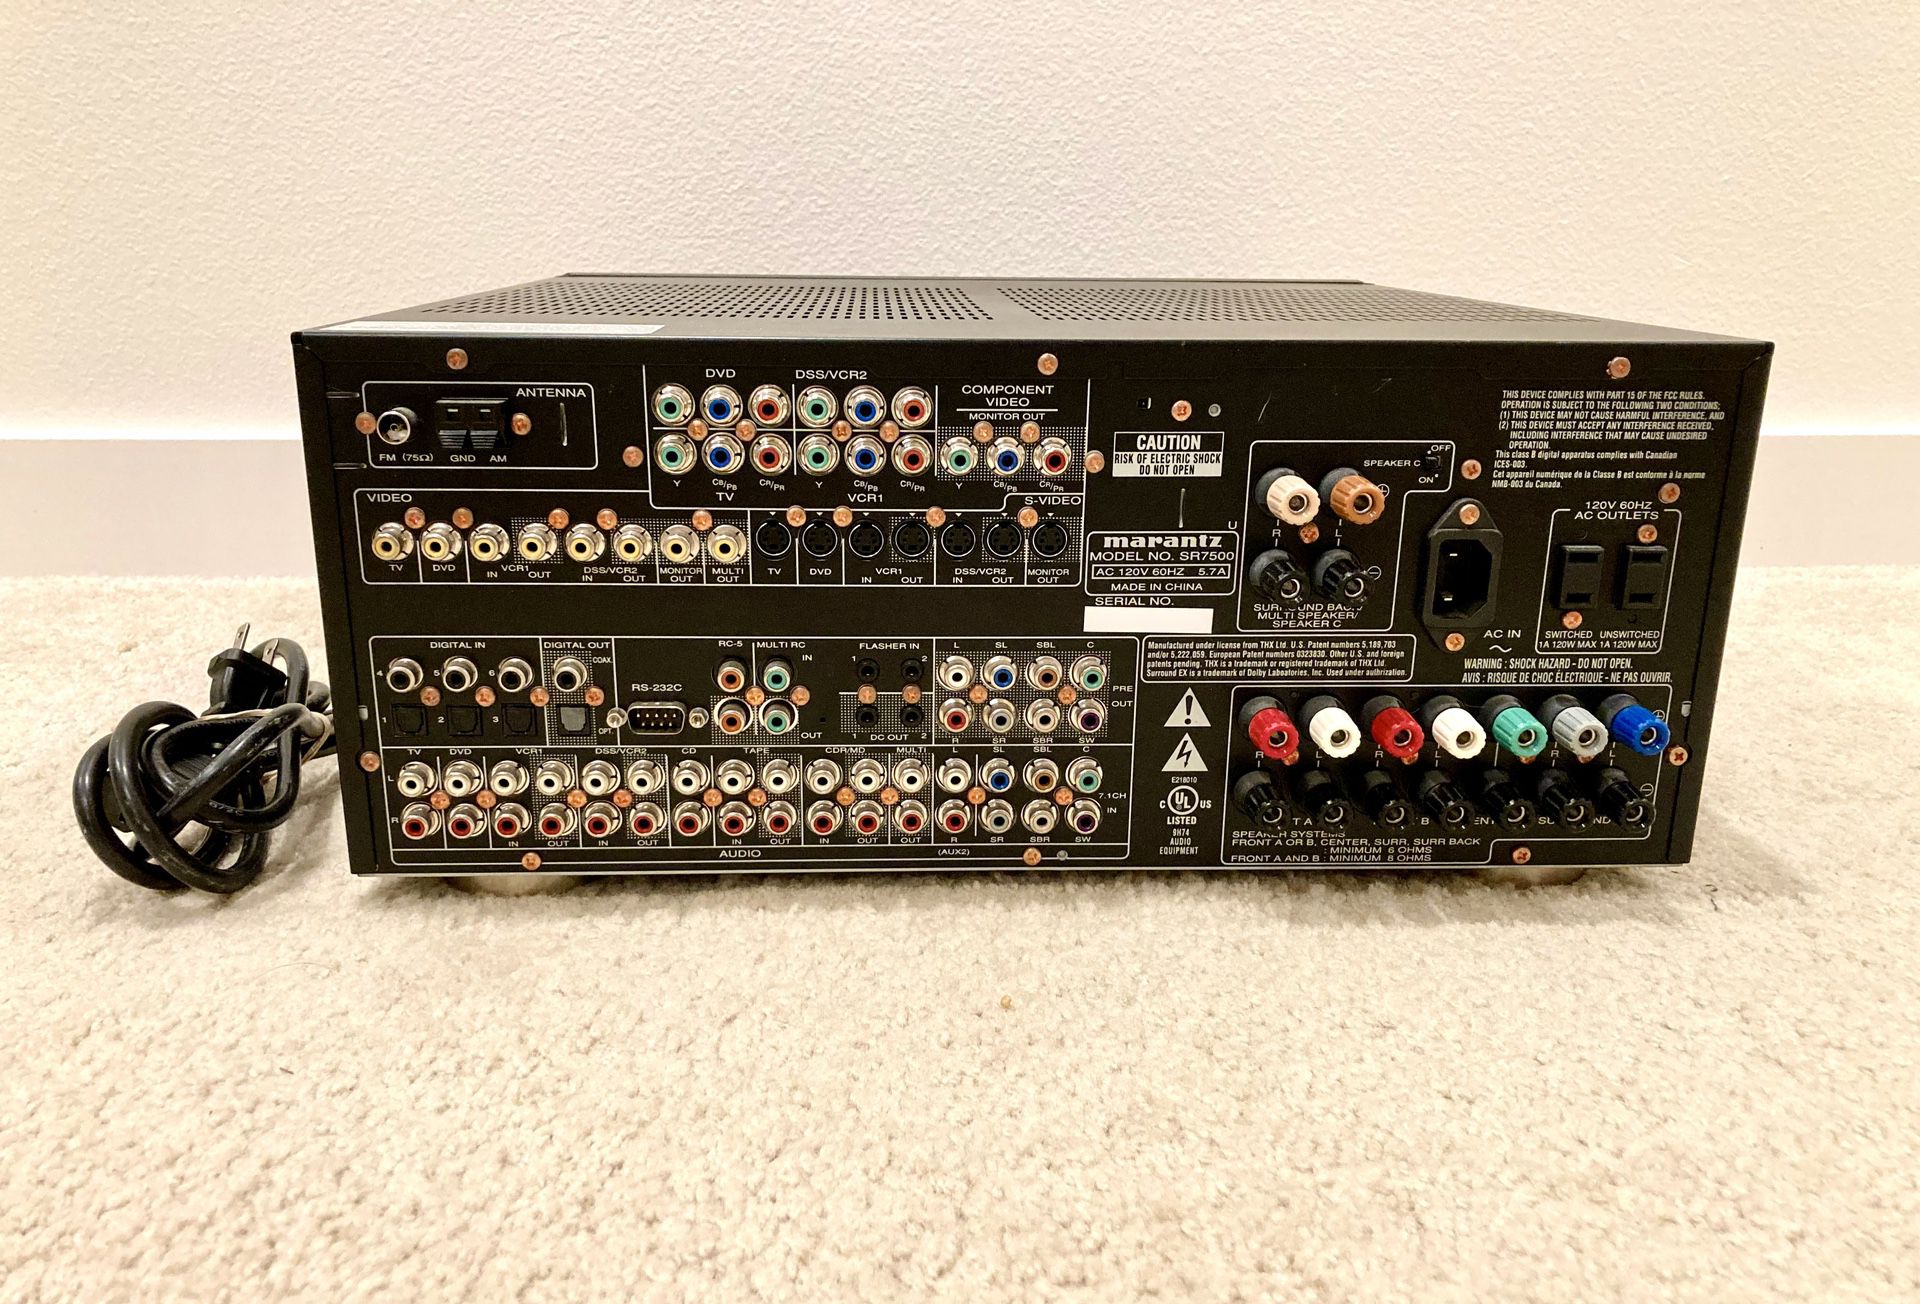 Marantz SR7500 105watt 7.1THX Receiver. High end a few years ago and sounds great. In very good condition.